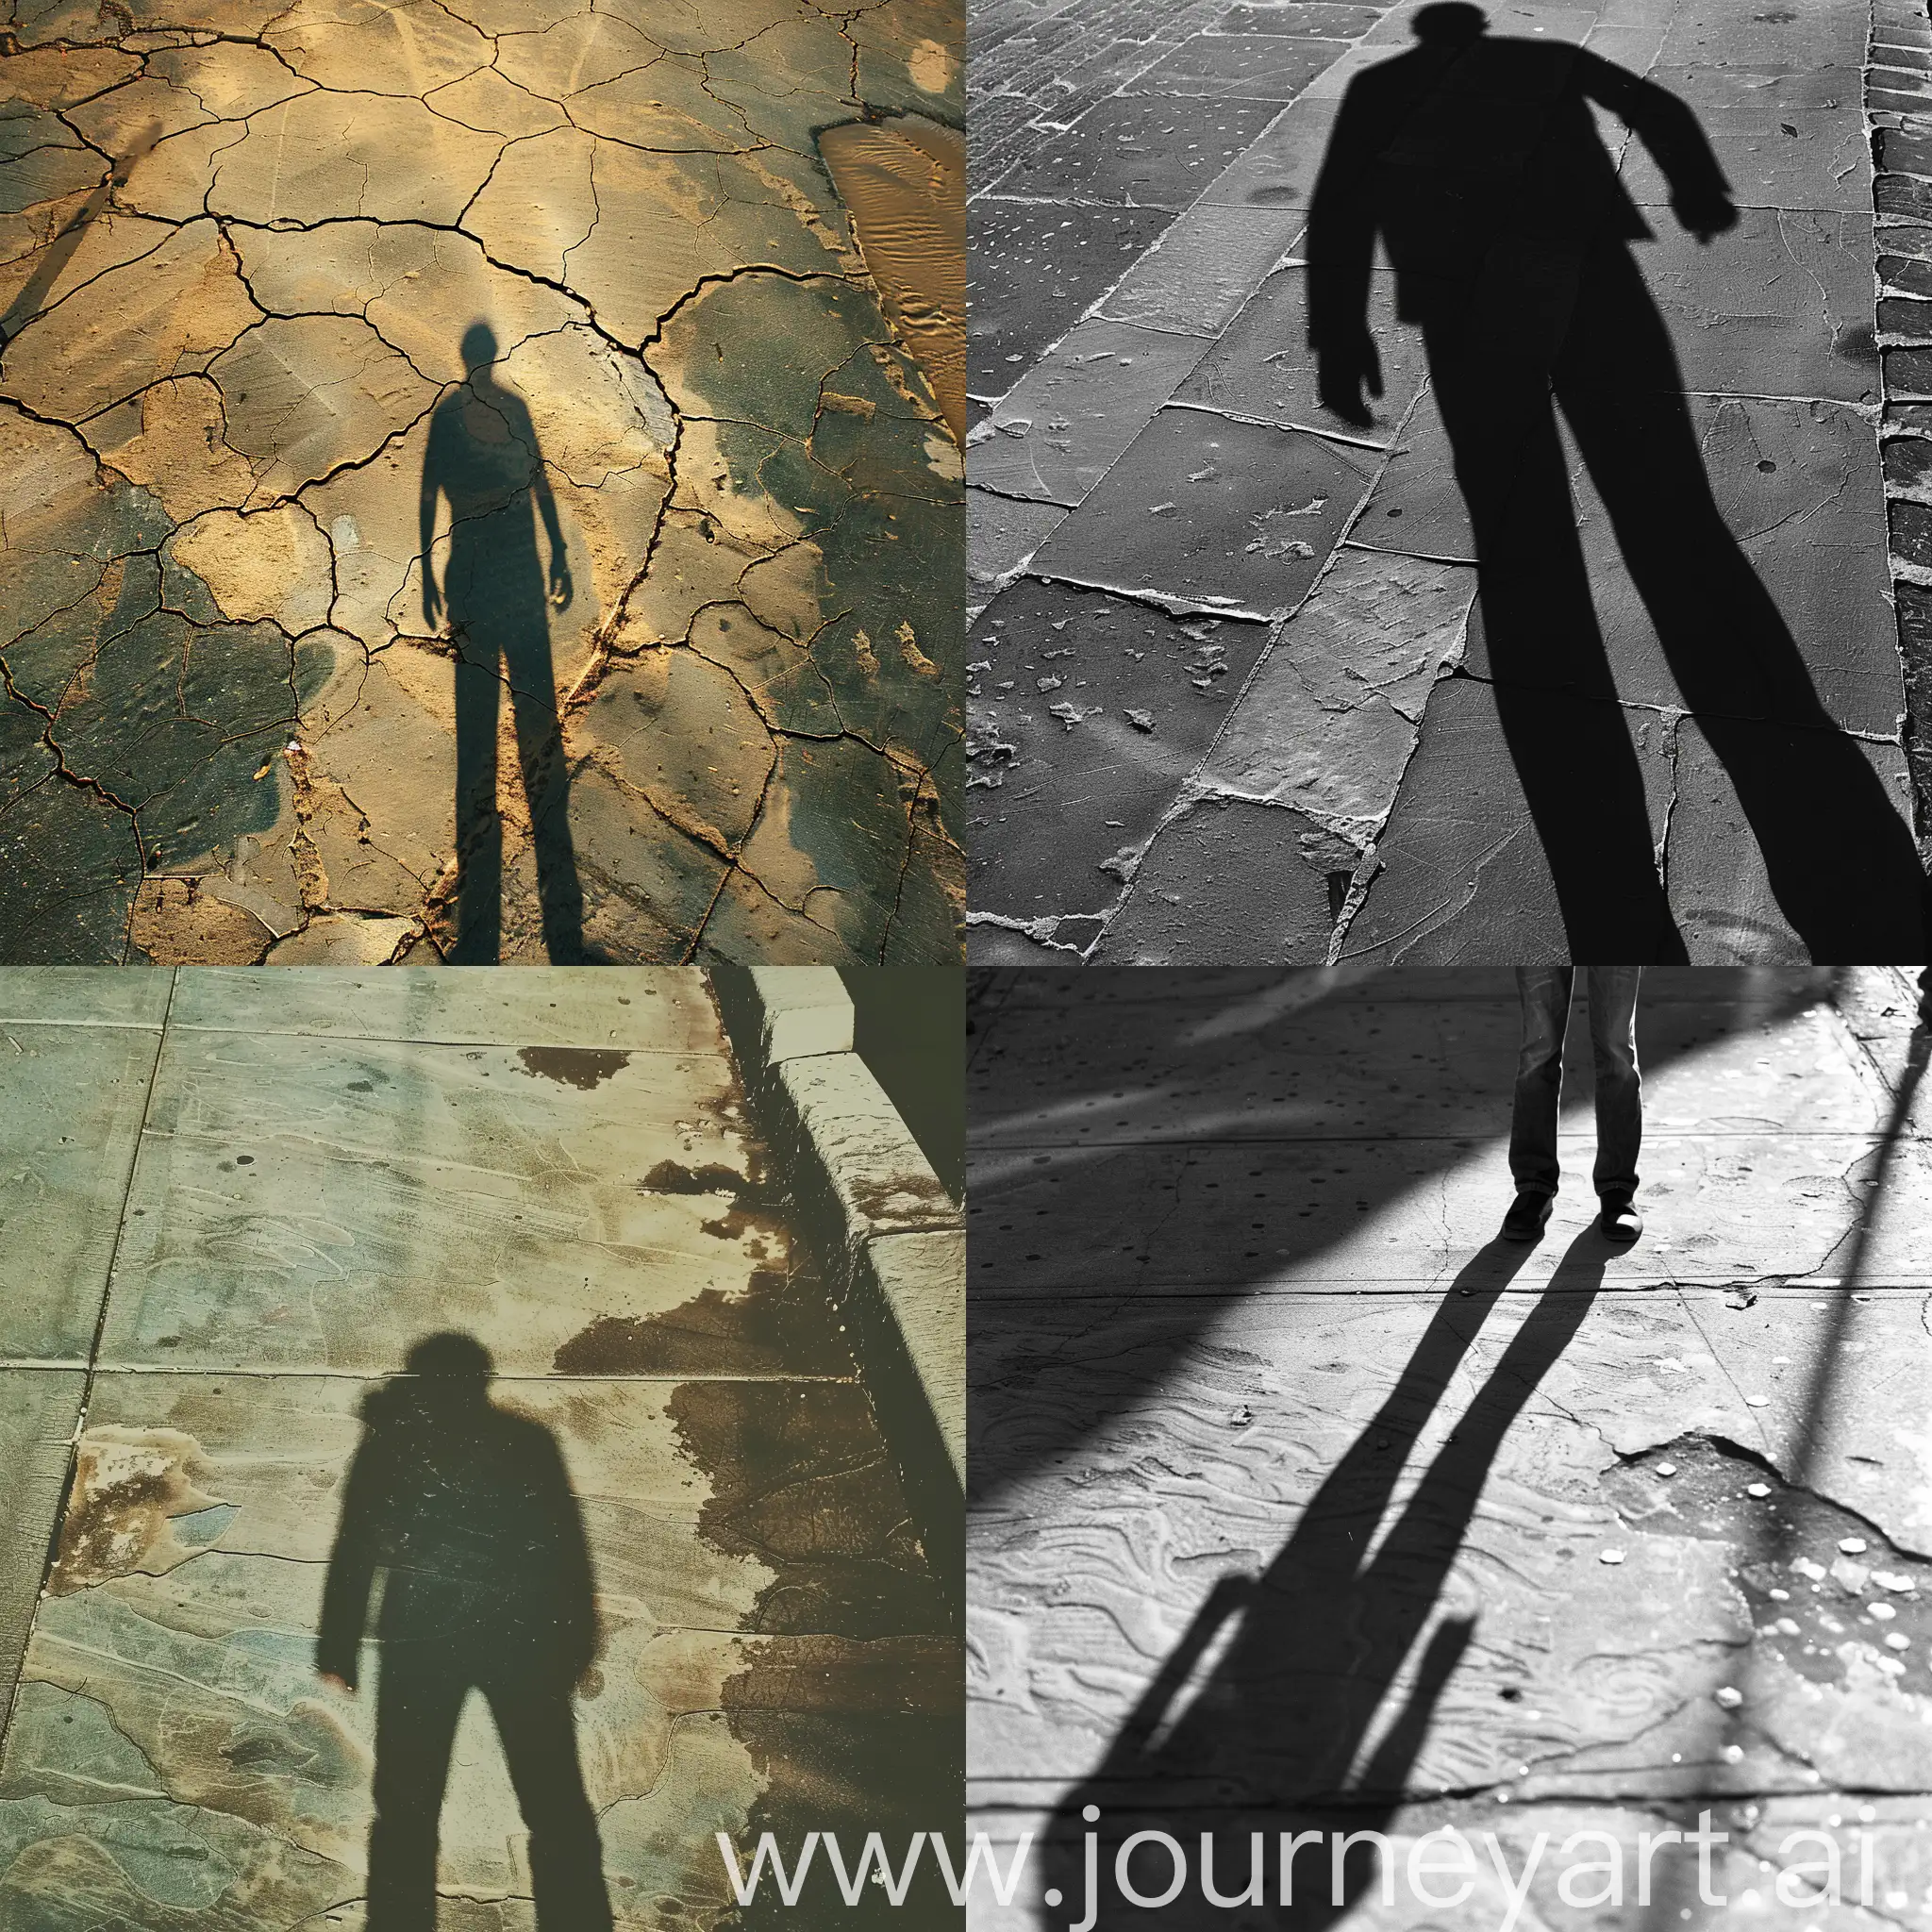 Movie Poster Photography: Shadow of a man on the ground